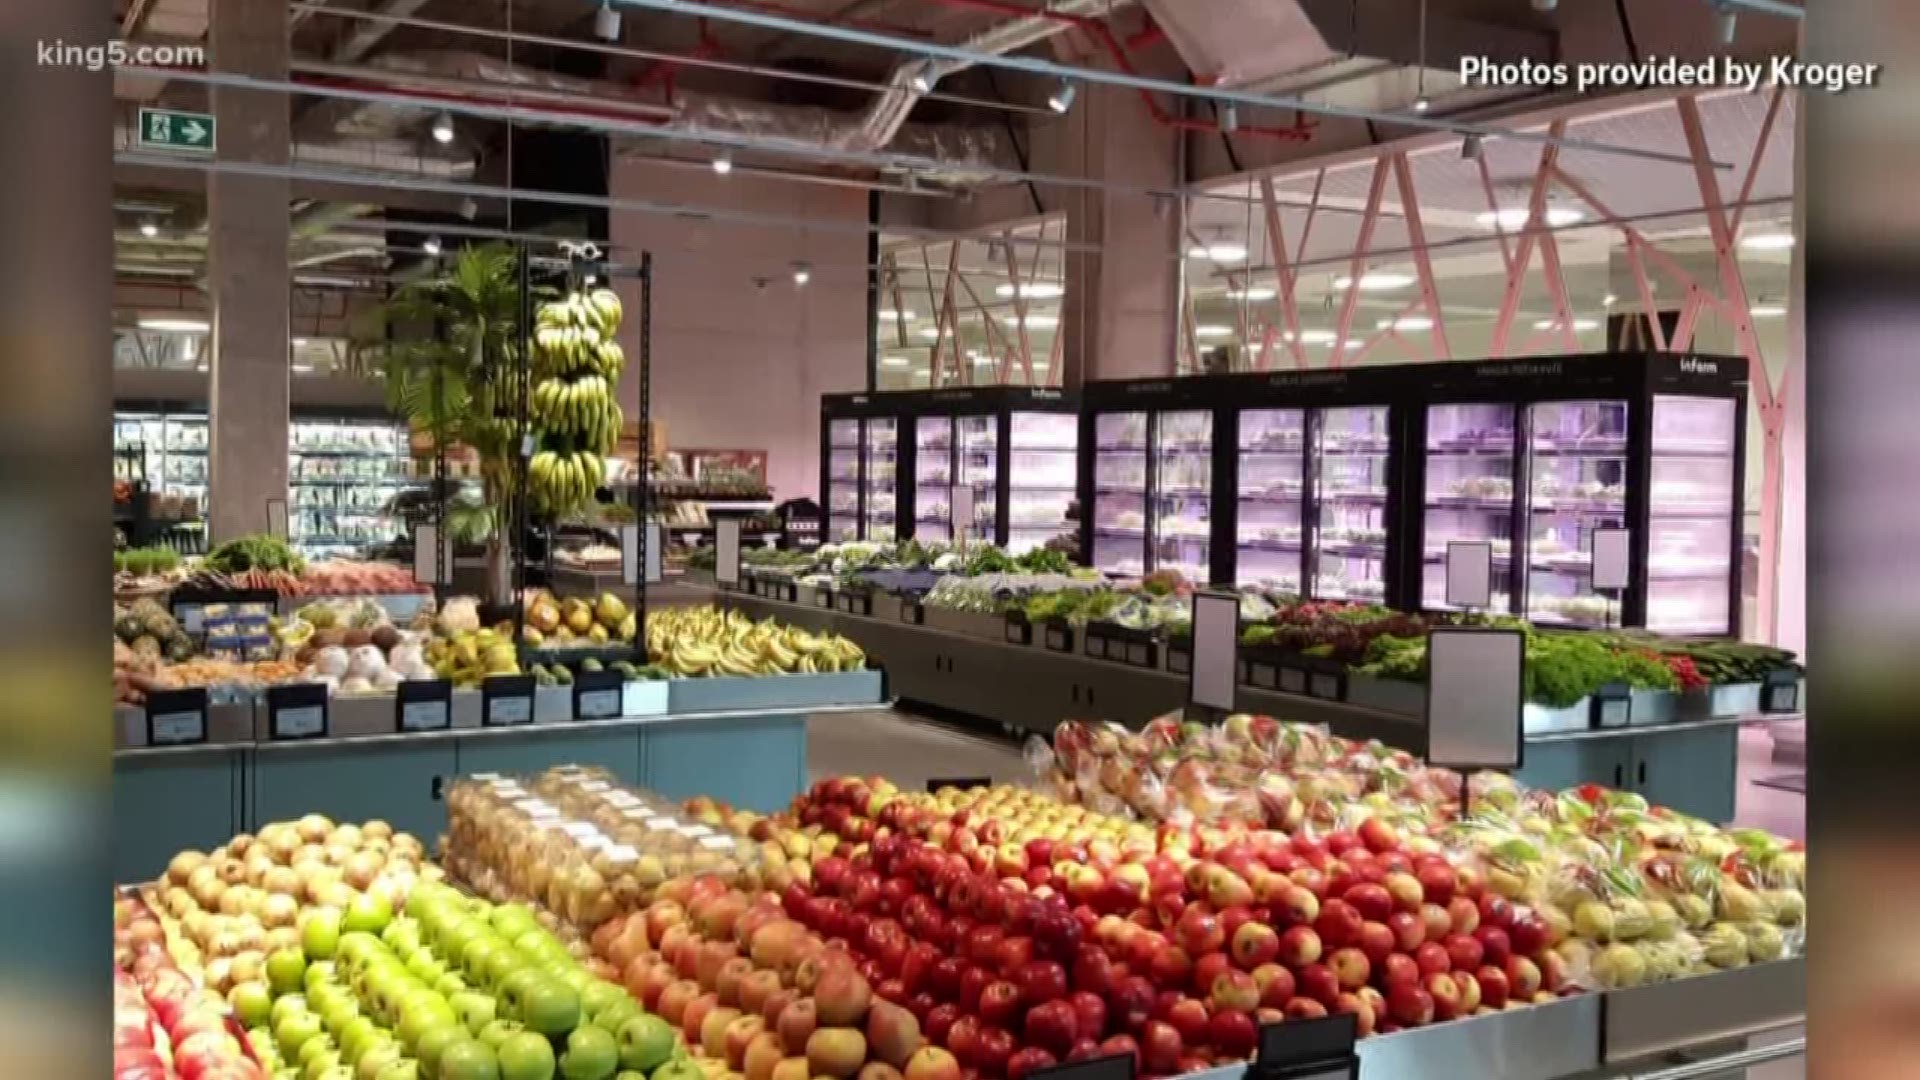 Kroger announced its partnering with German company Infarm to bring living produce farms to its QFC stores around western Washington.